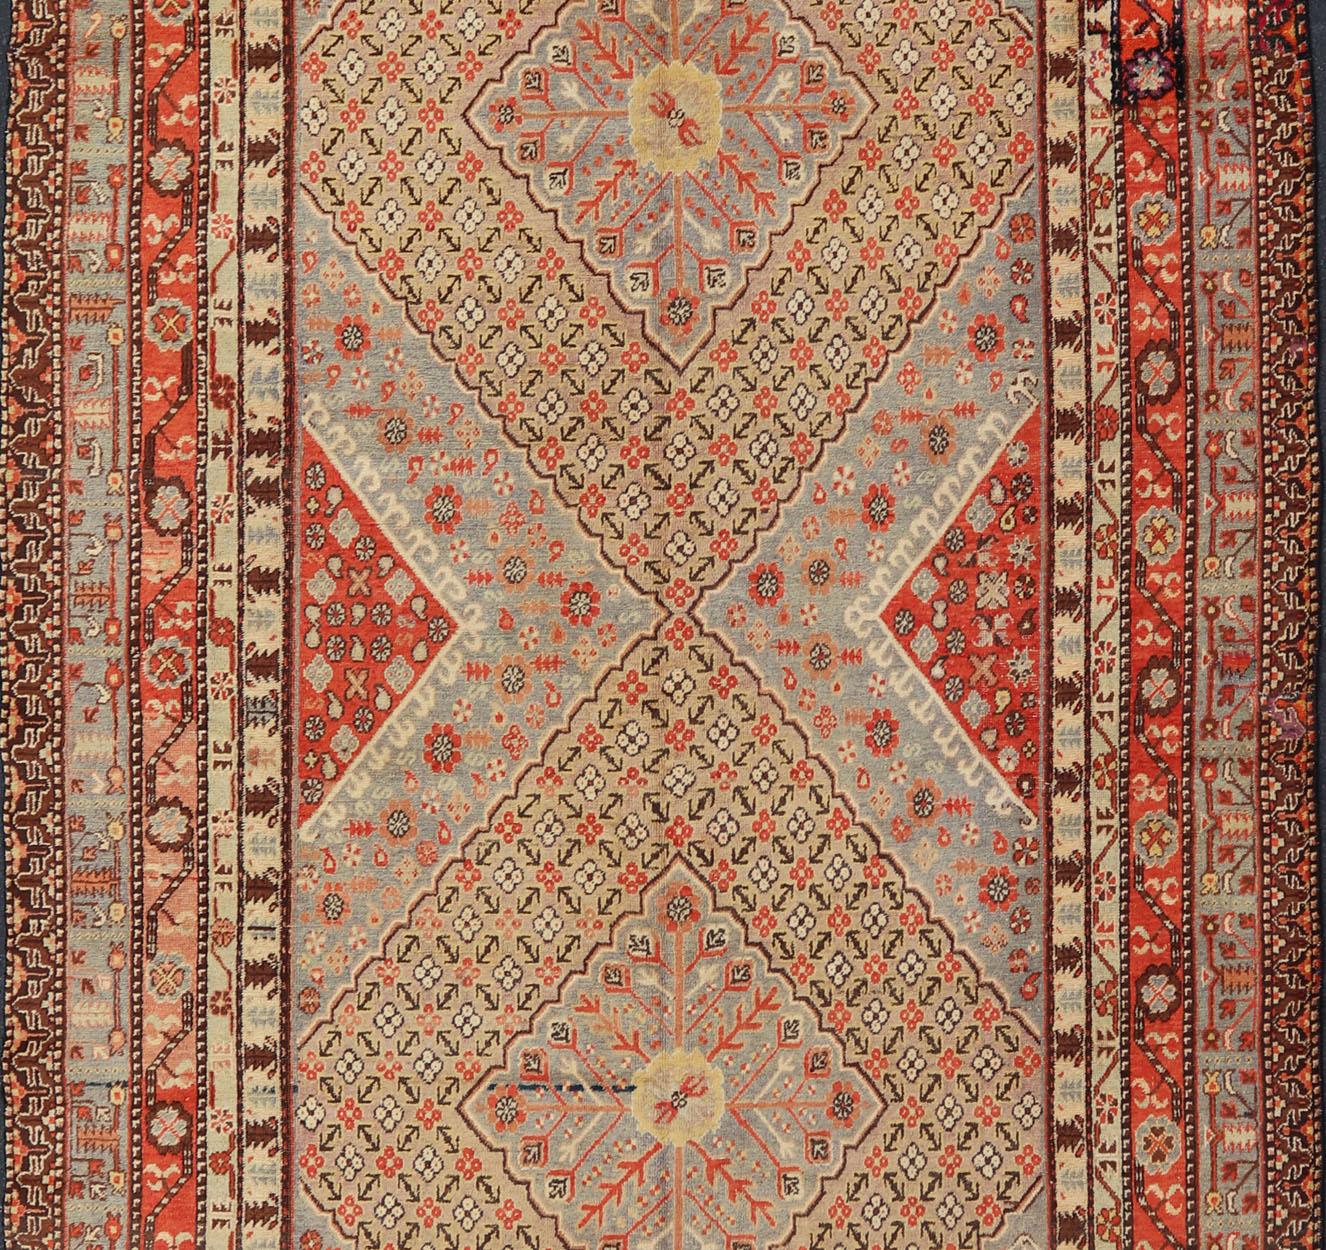 Large Antique Khotan Gallery Rug with Diamonds in Yellow, Orange, Brown & Gray In Good Condition For Sale In Atlanta, GA